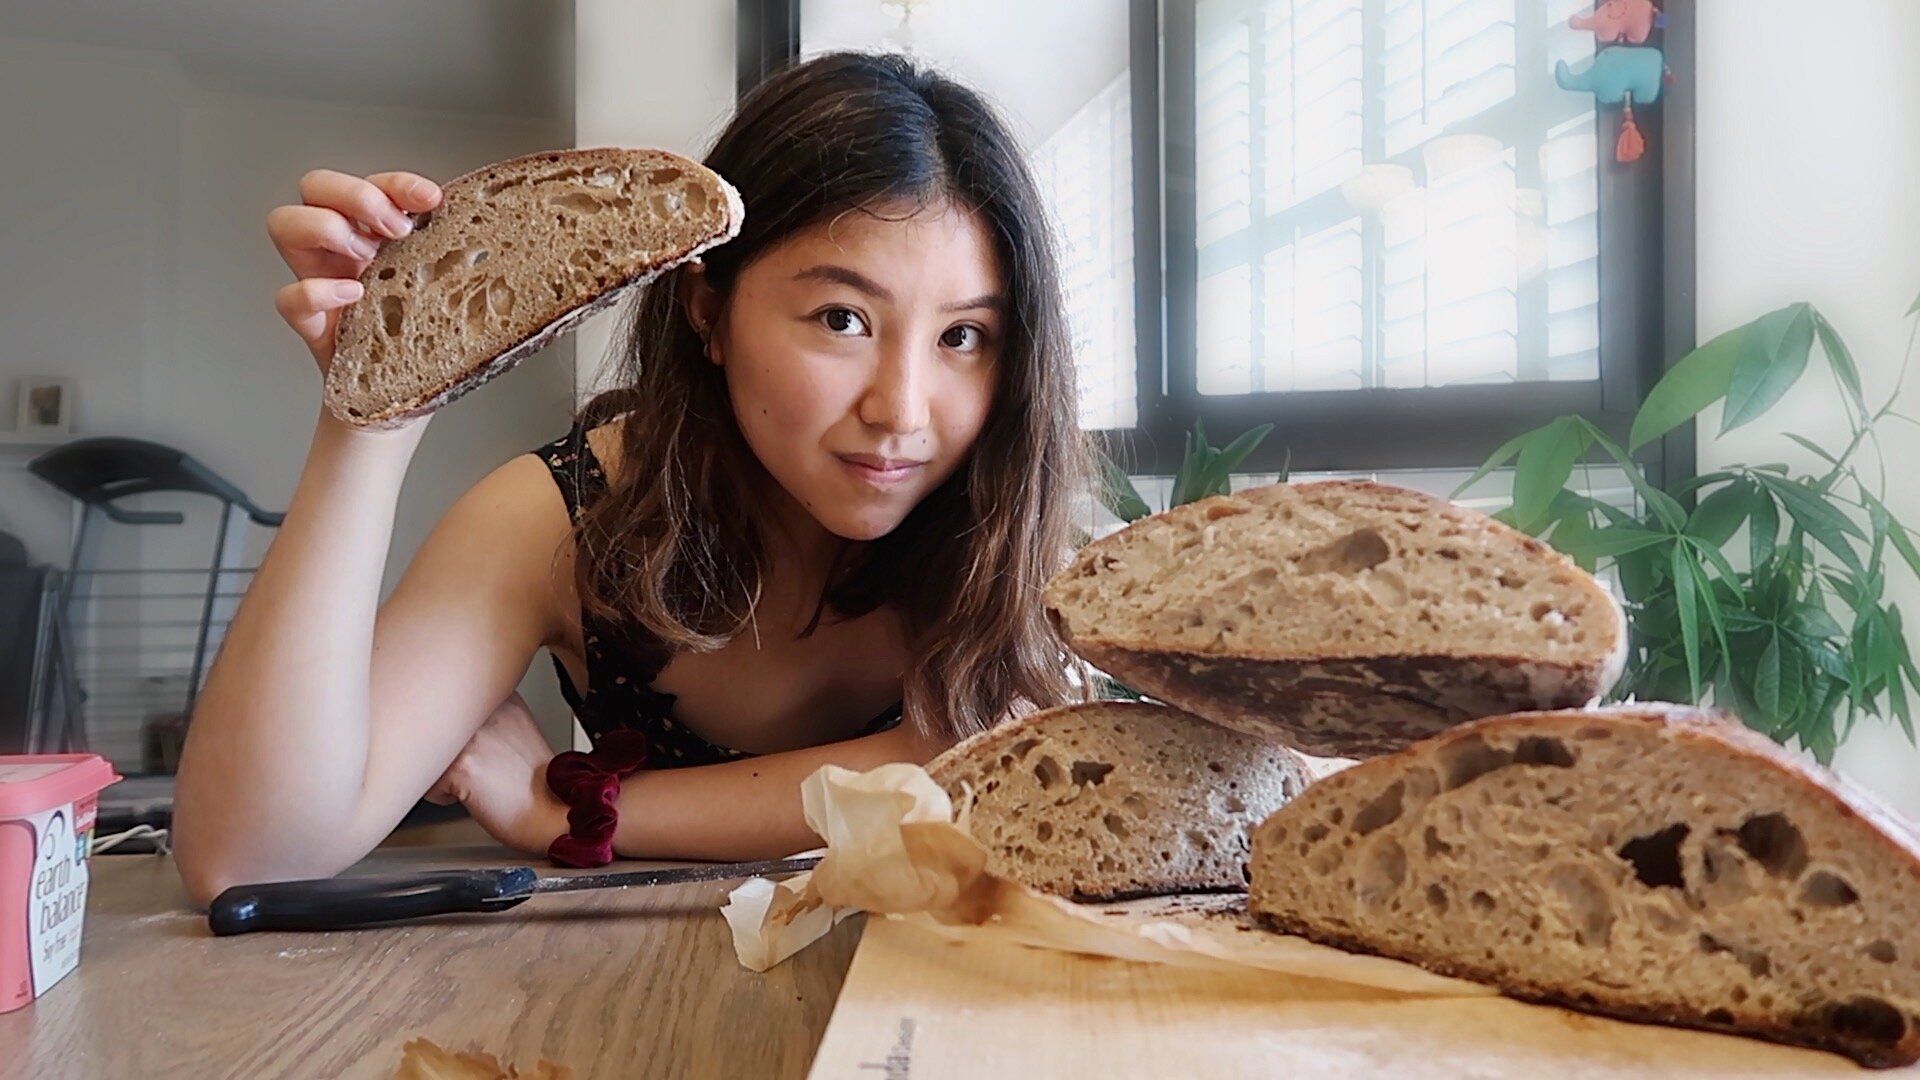 Turn on Captions] The SIMPLEST OPEN CRUMB Sourdough Bread - NO Food Scale,  Banneton or Dutch Oven 